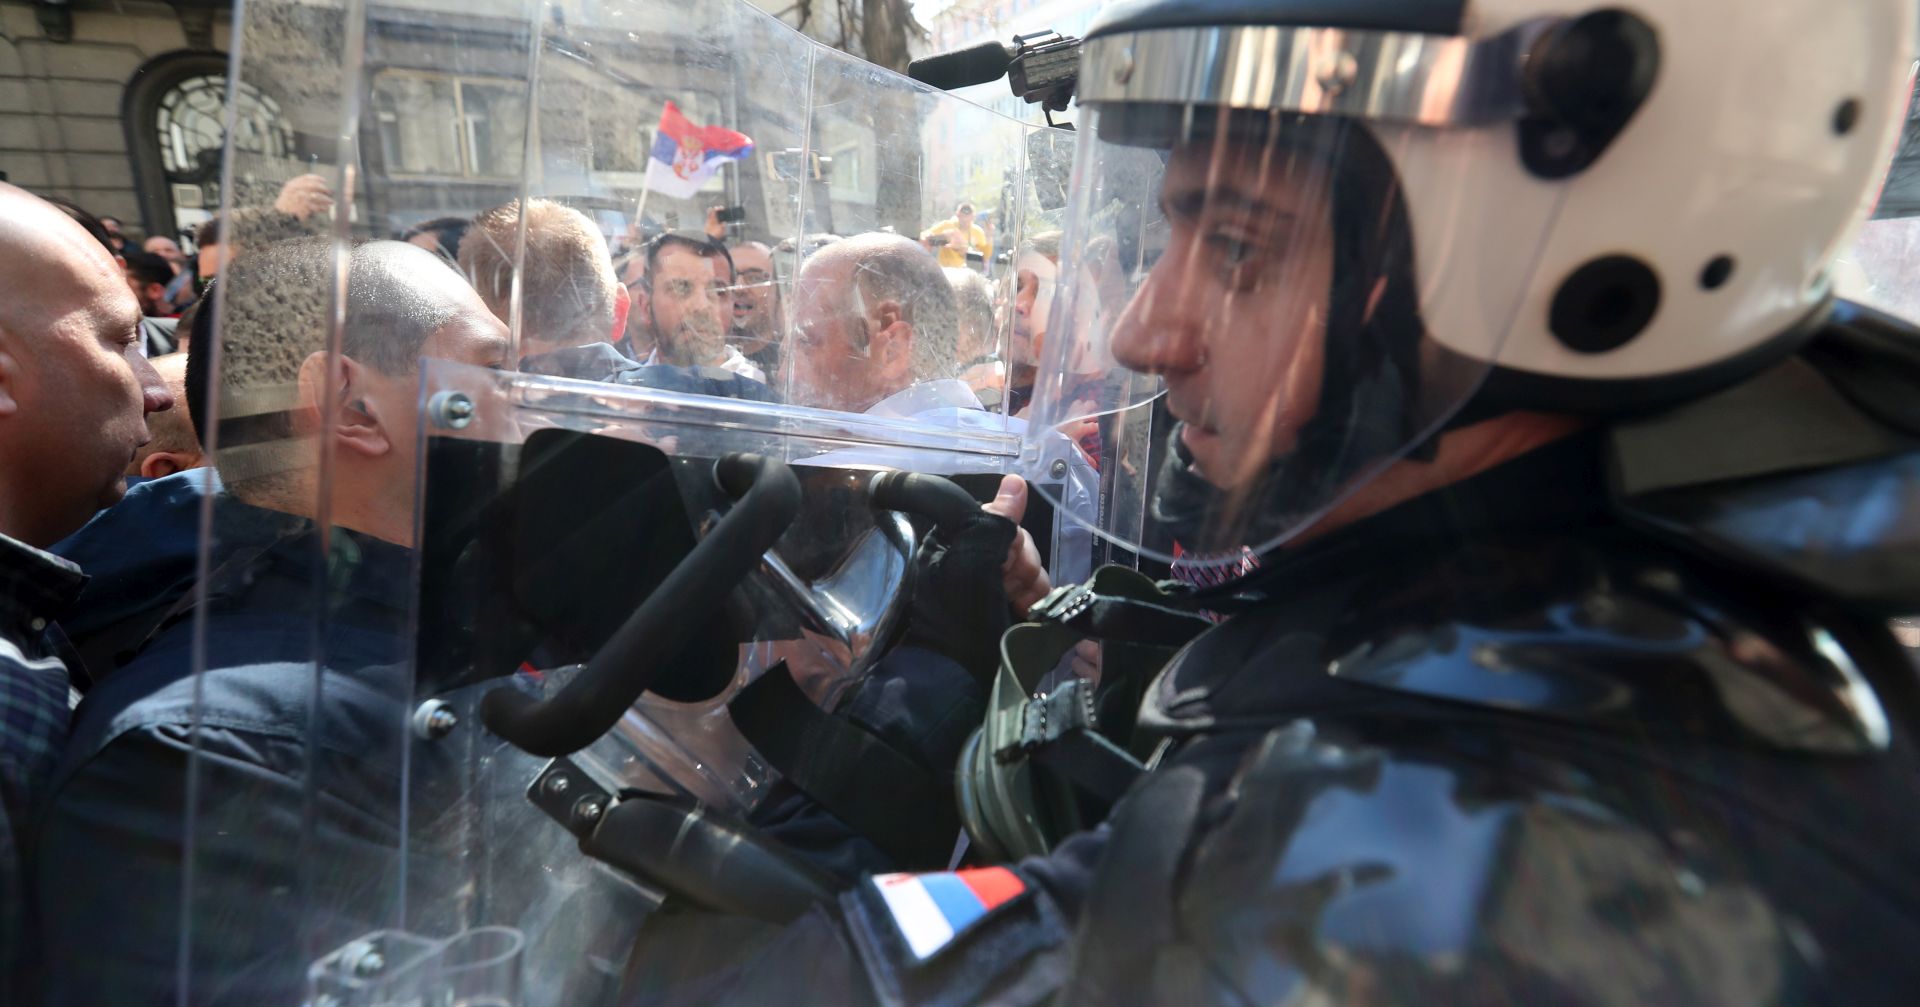 epa07444535 Riot policeman stand guard in front of the office of the President of Serbia in Belgrade, Serbia, 17 March 2019. Thousands of people protested in Serbia against the President Aleksandar Vucic over what they say has been a smothering of democratic freedoms under his government.  EPA/SRDJAN SUKI